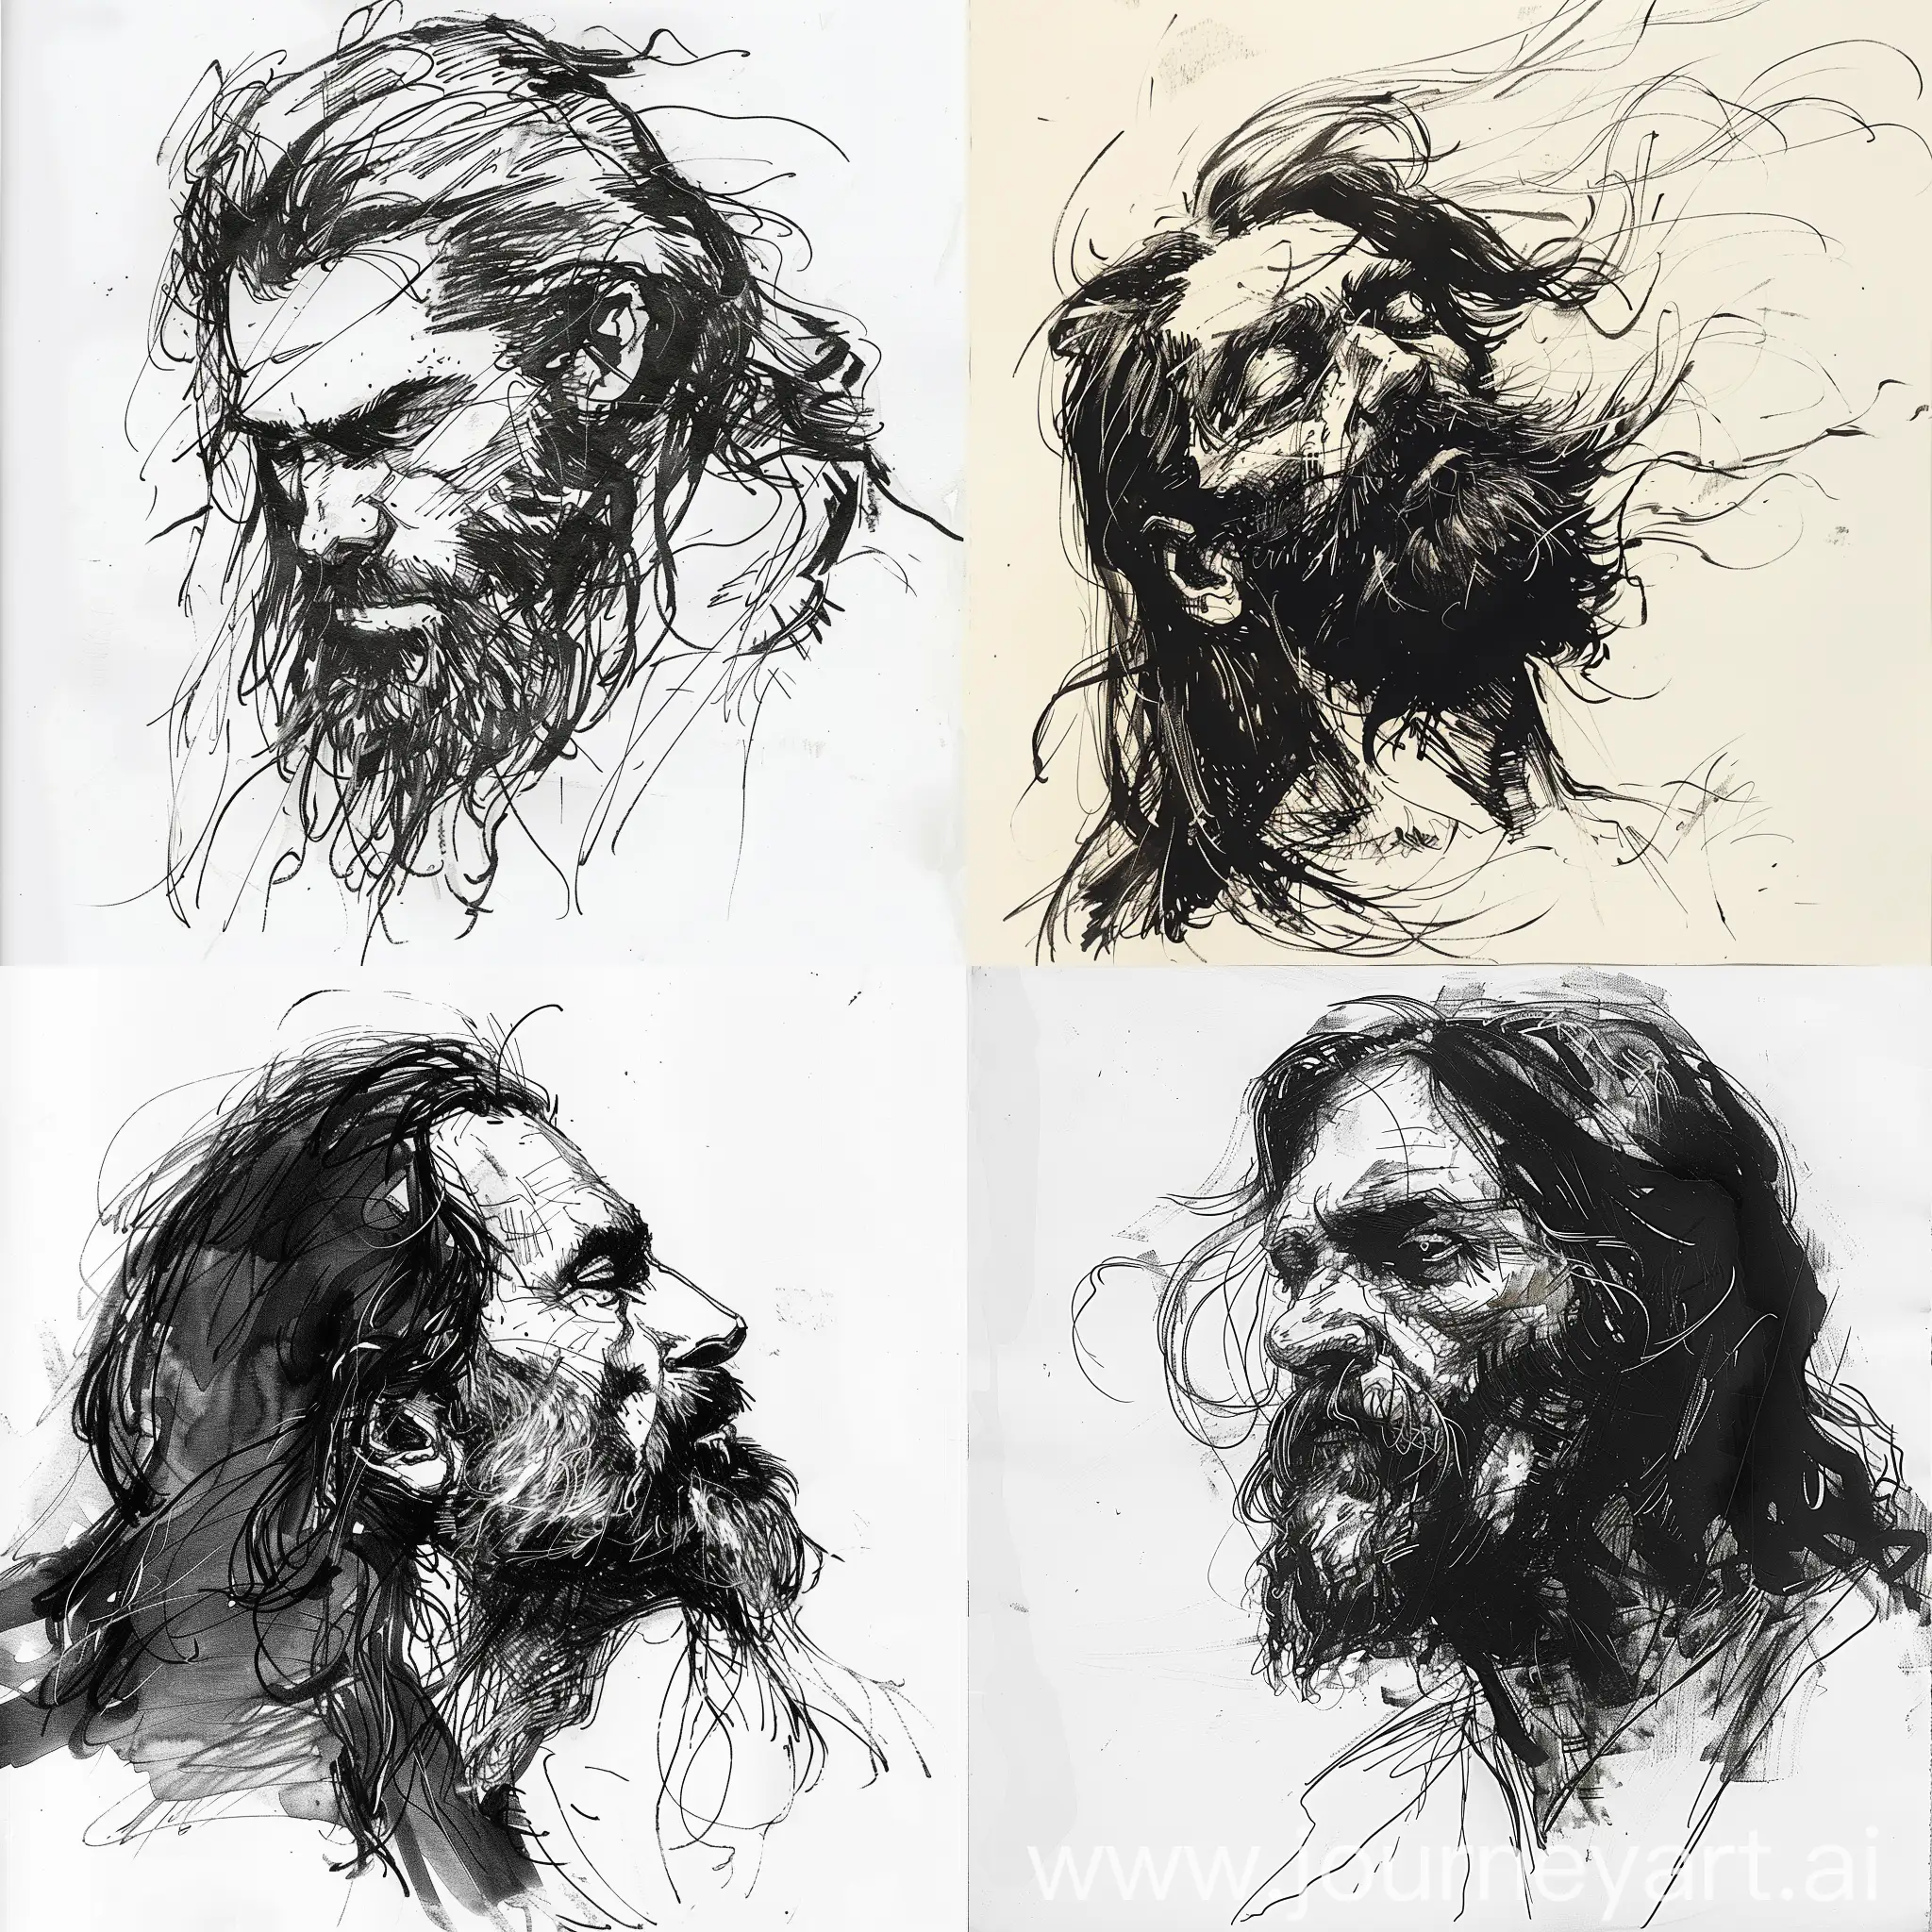 Middle-Aged-Man-with-Long-Hair-and-Beard-in-Yoji-Shinkawa-Style-Concept-Sketch